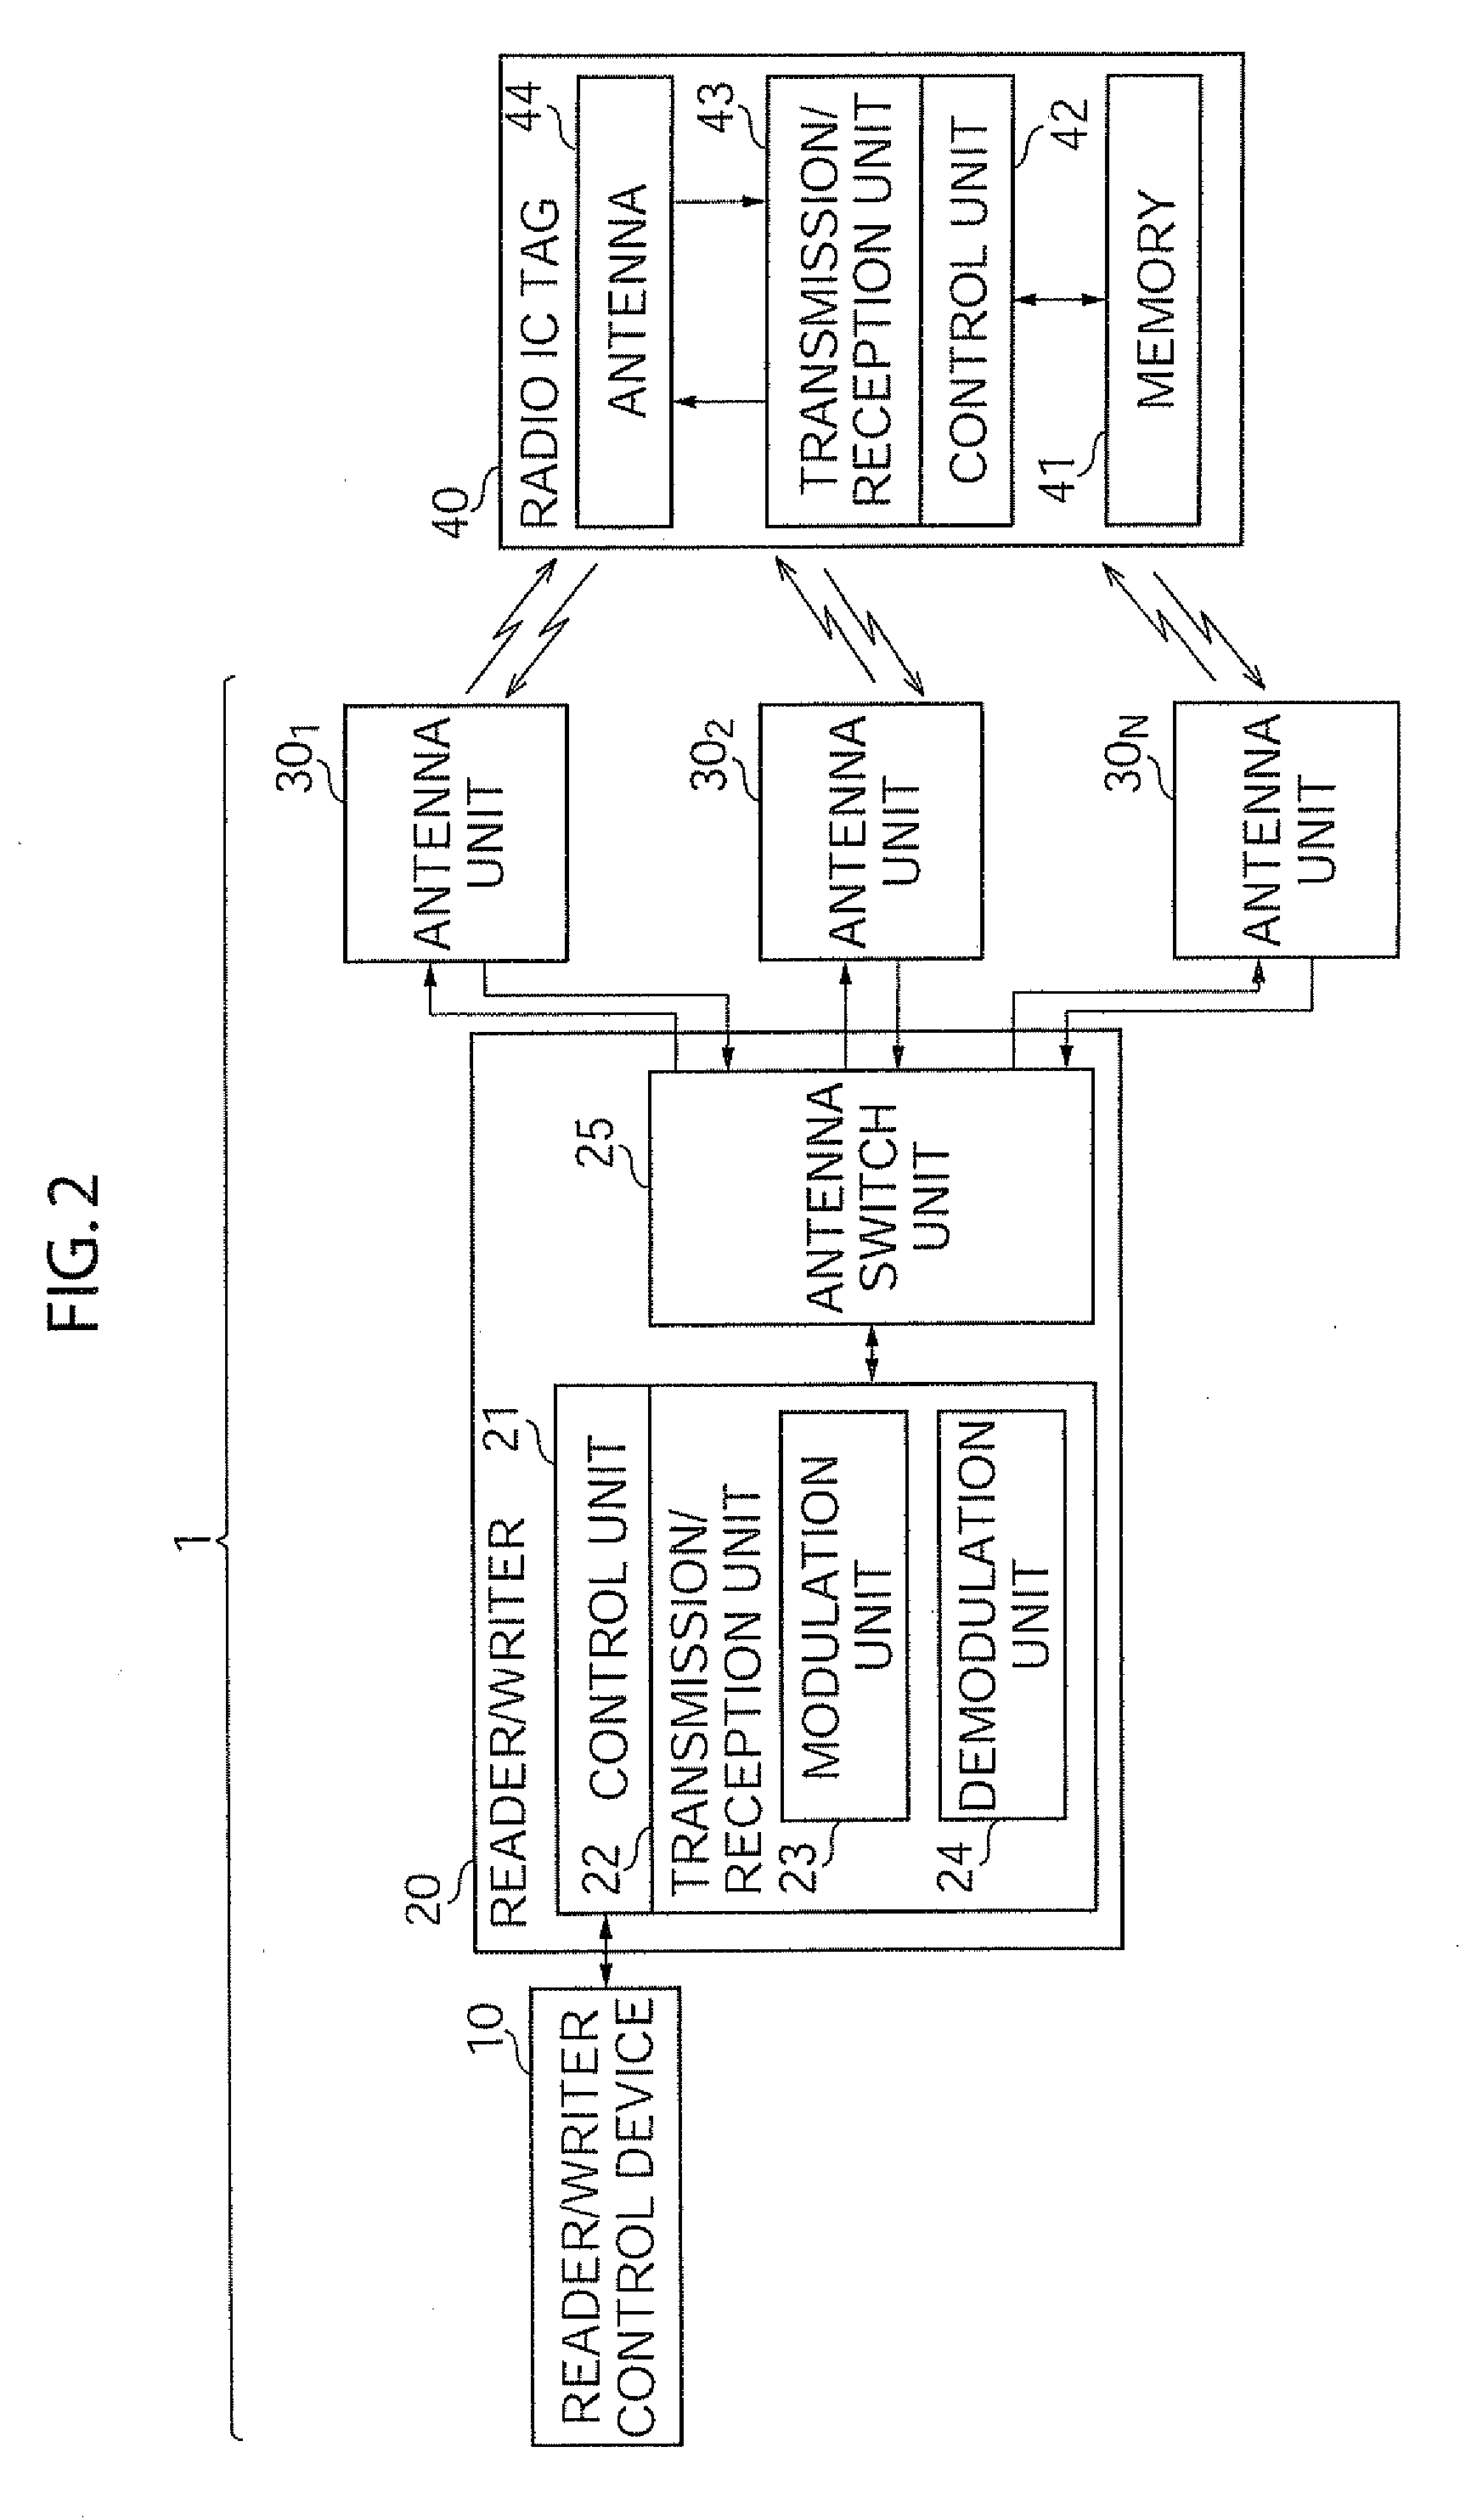 Data reader and positioning system